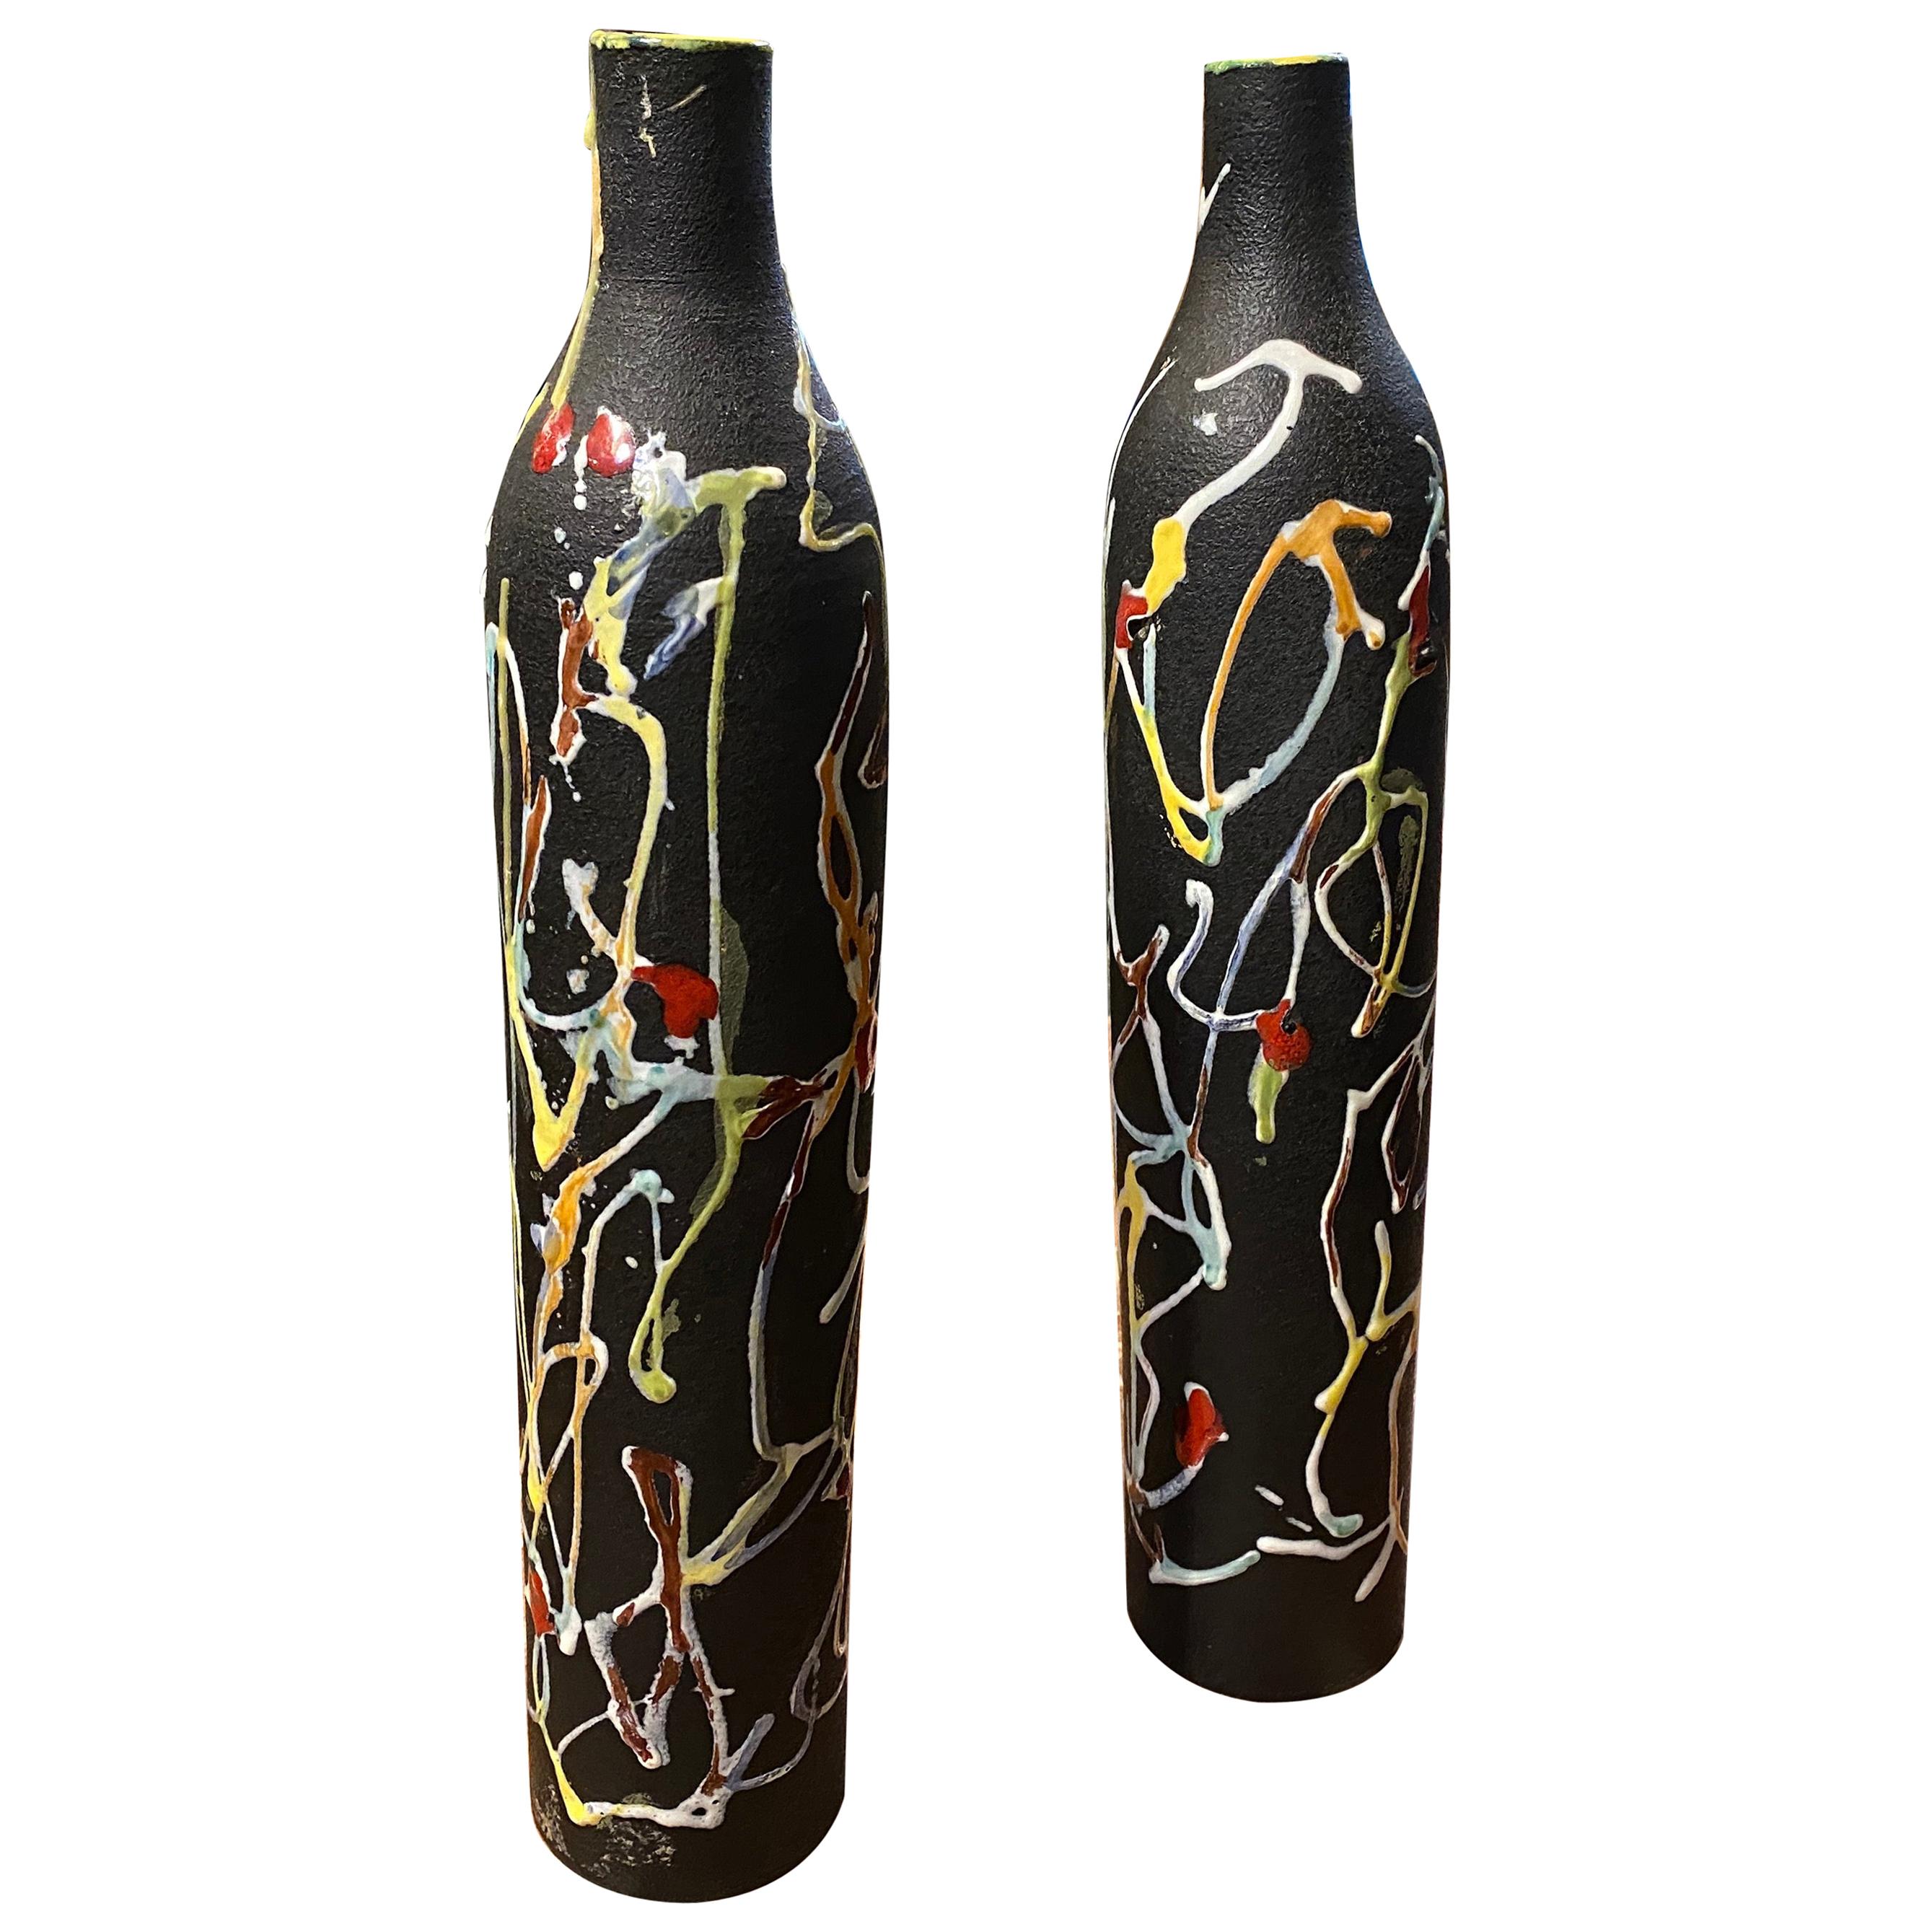 1970s Set of Two Modernist Italian Ceramic Bottle Vases by Ce.As Albisola For Sale